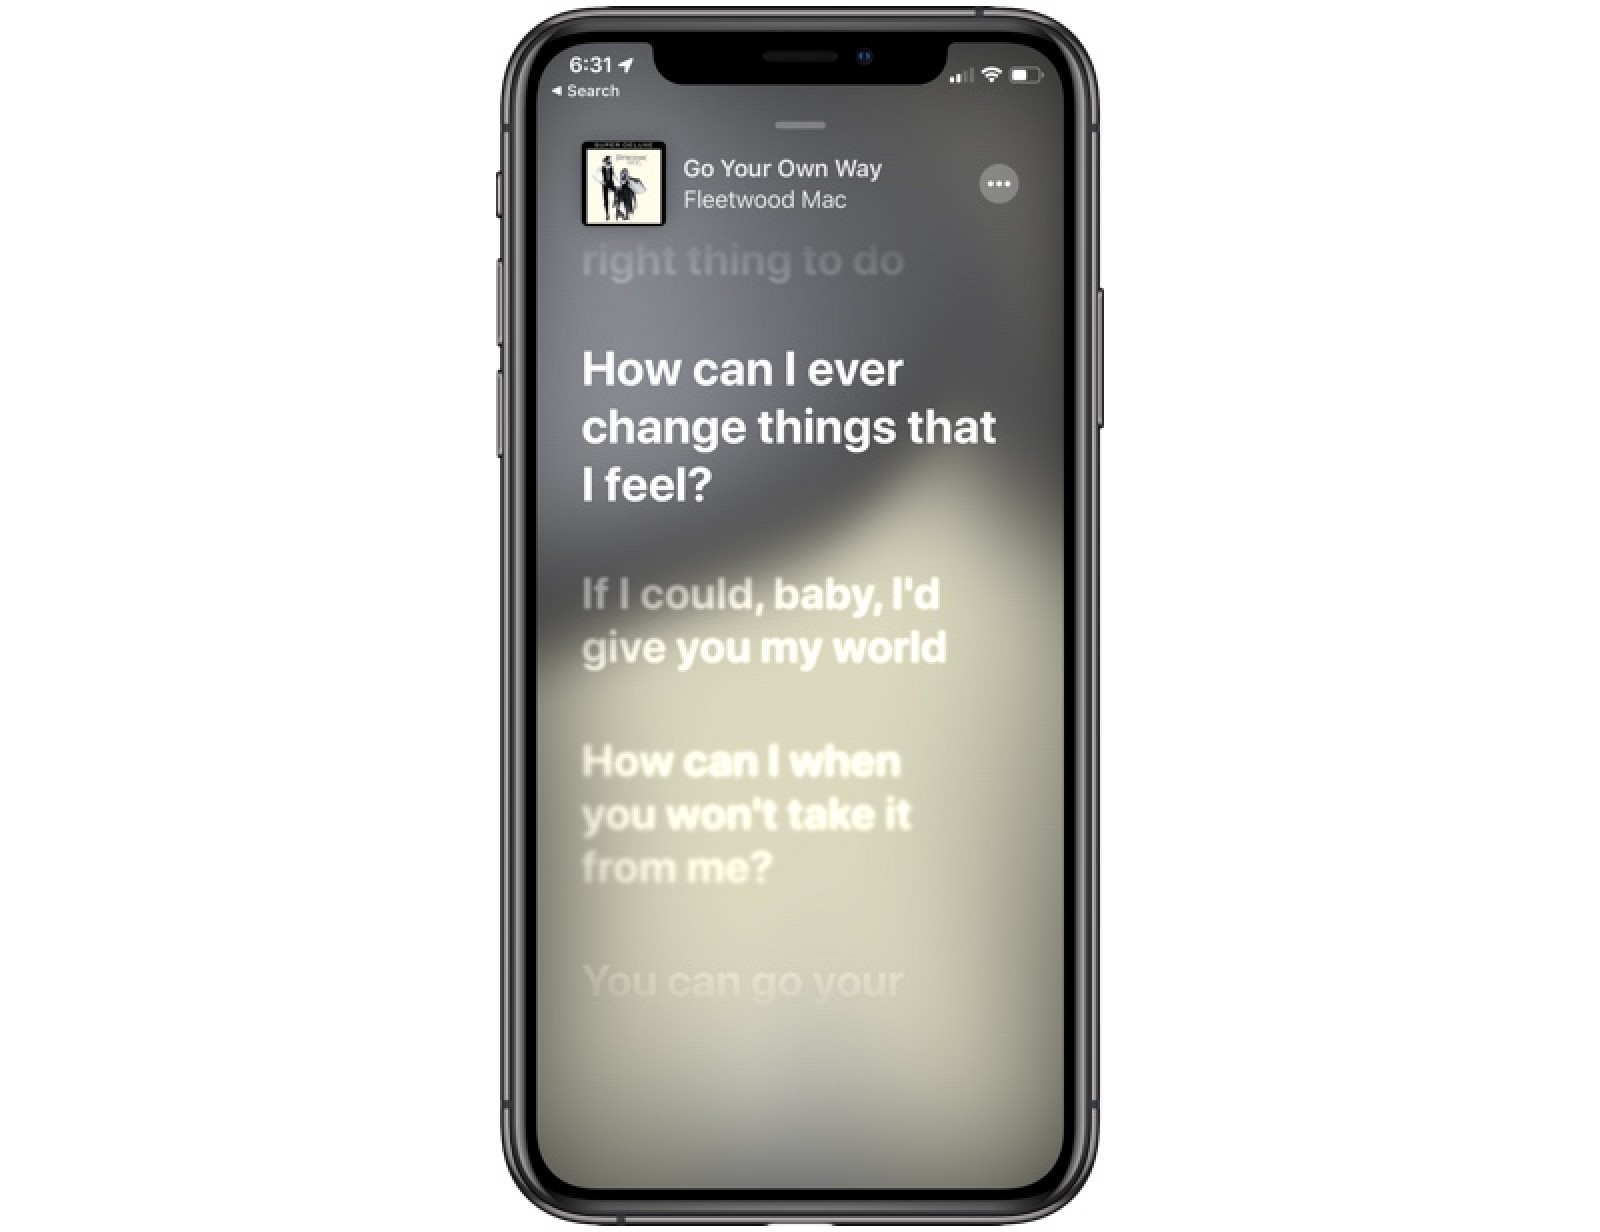 Apple Employees Help Transcribe Music for iOS 13's New Real-Time Lyrics Feature